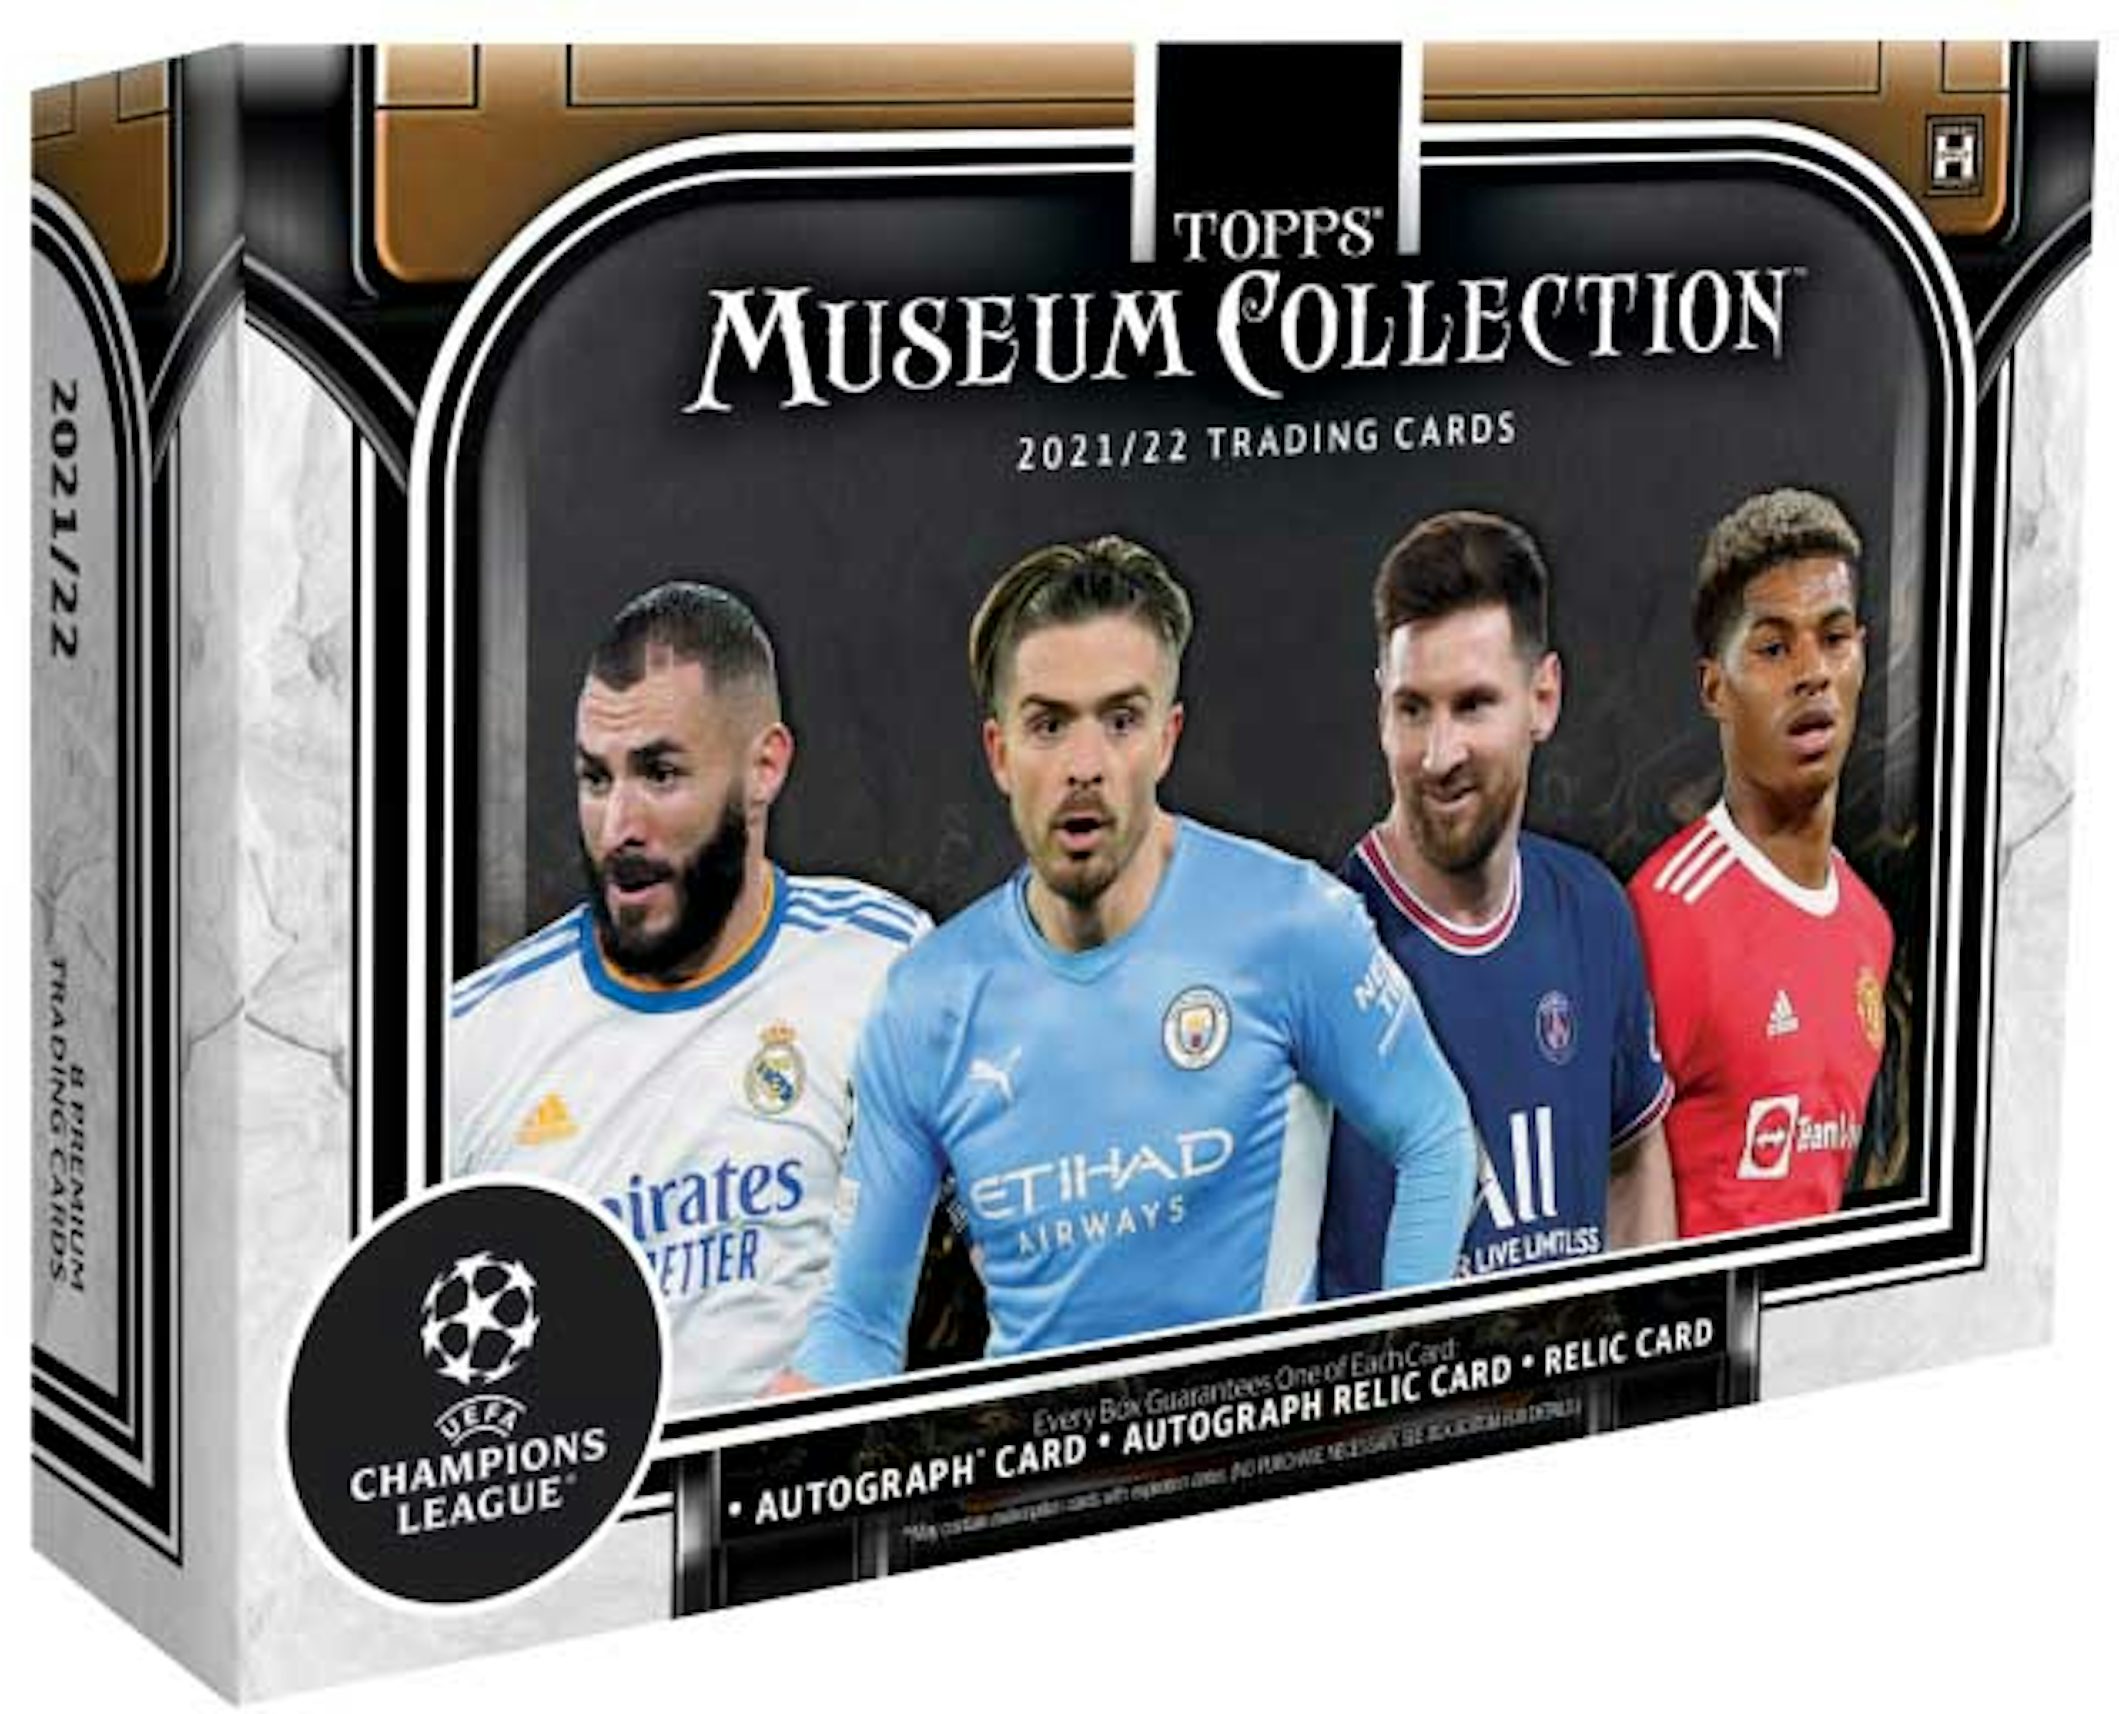 https://images.stockx.com/images/2021-22-Topps-Museum-Collection-UEFA-Champions-League-Soccer-Hobby-Box-Updated.jpg?fit=fill&bg=FFFFFF&w=1200&h=857&fm=jpg&auto=compress&dpr=2&trim=color&updated_at=1658887093&q=60